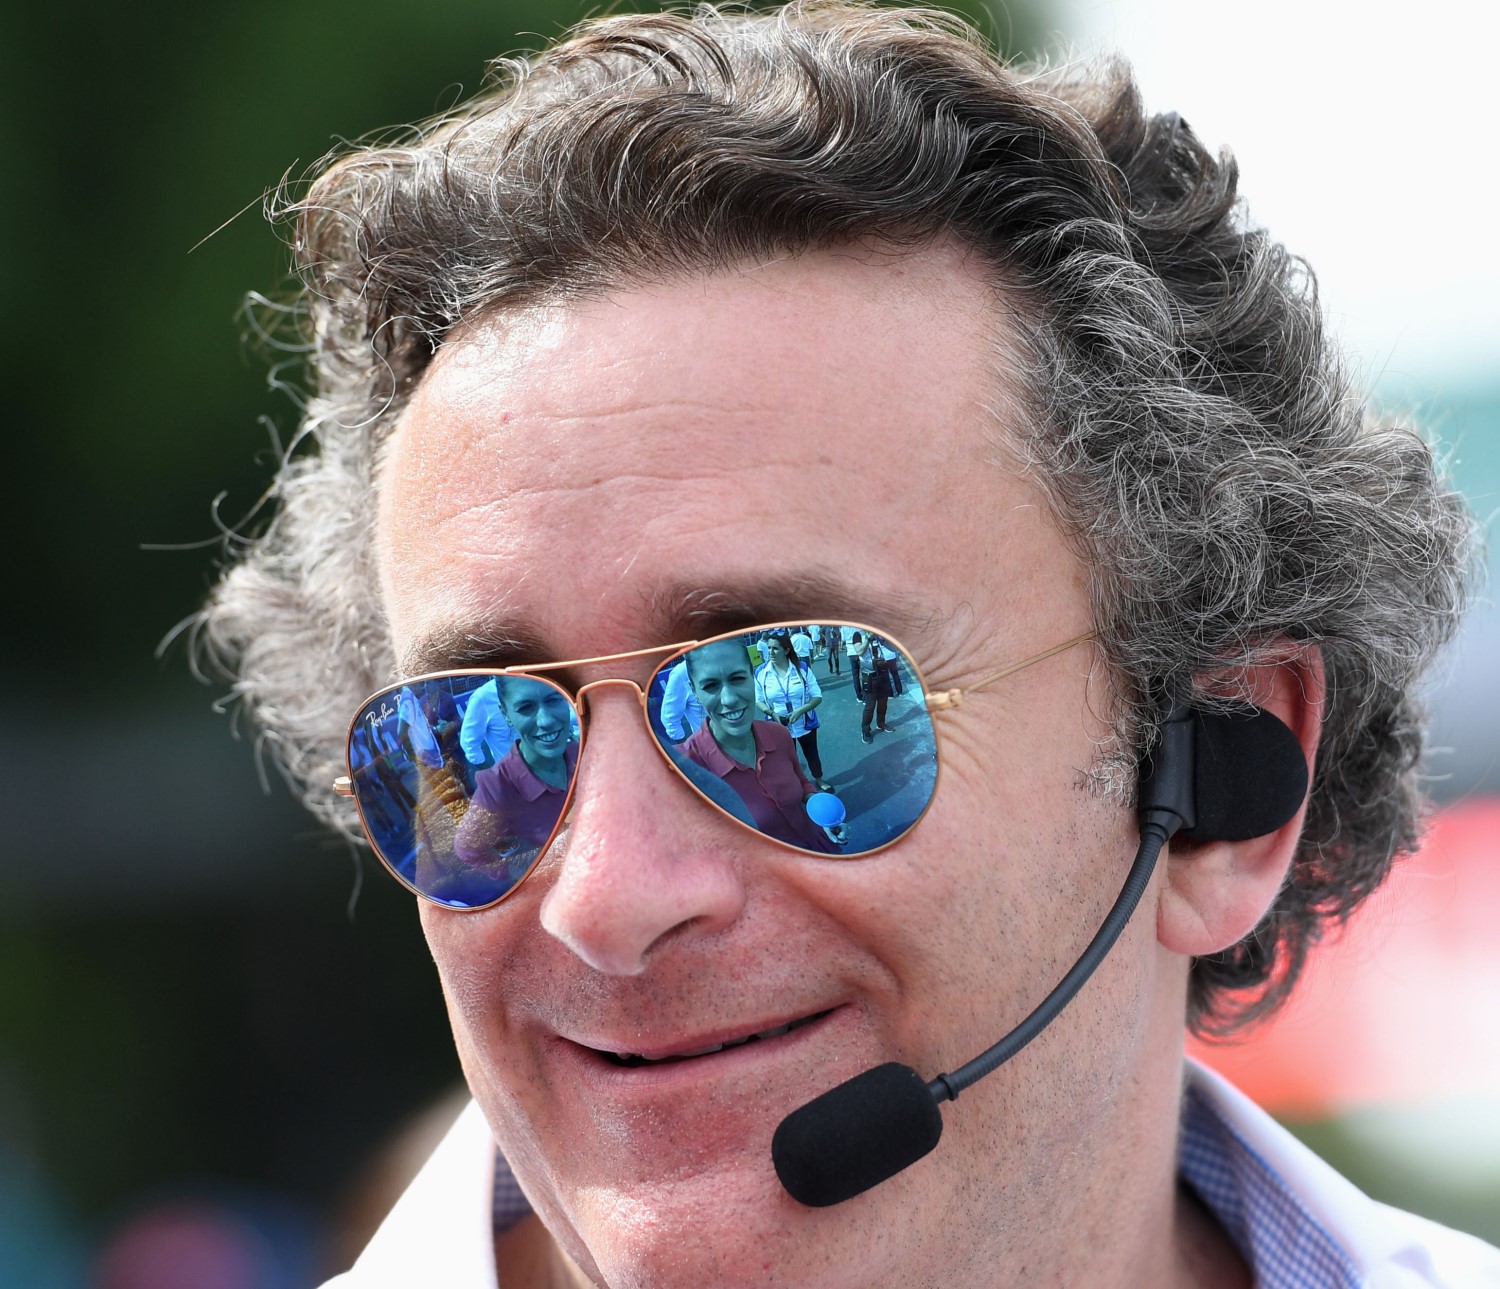 Like Bernie Ecclestone, Agag realizes you must invest in a global TV package to become an international powerhouse